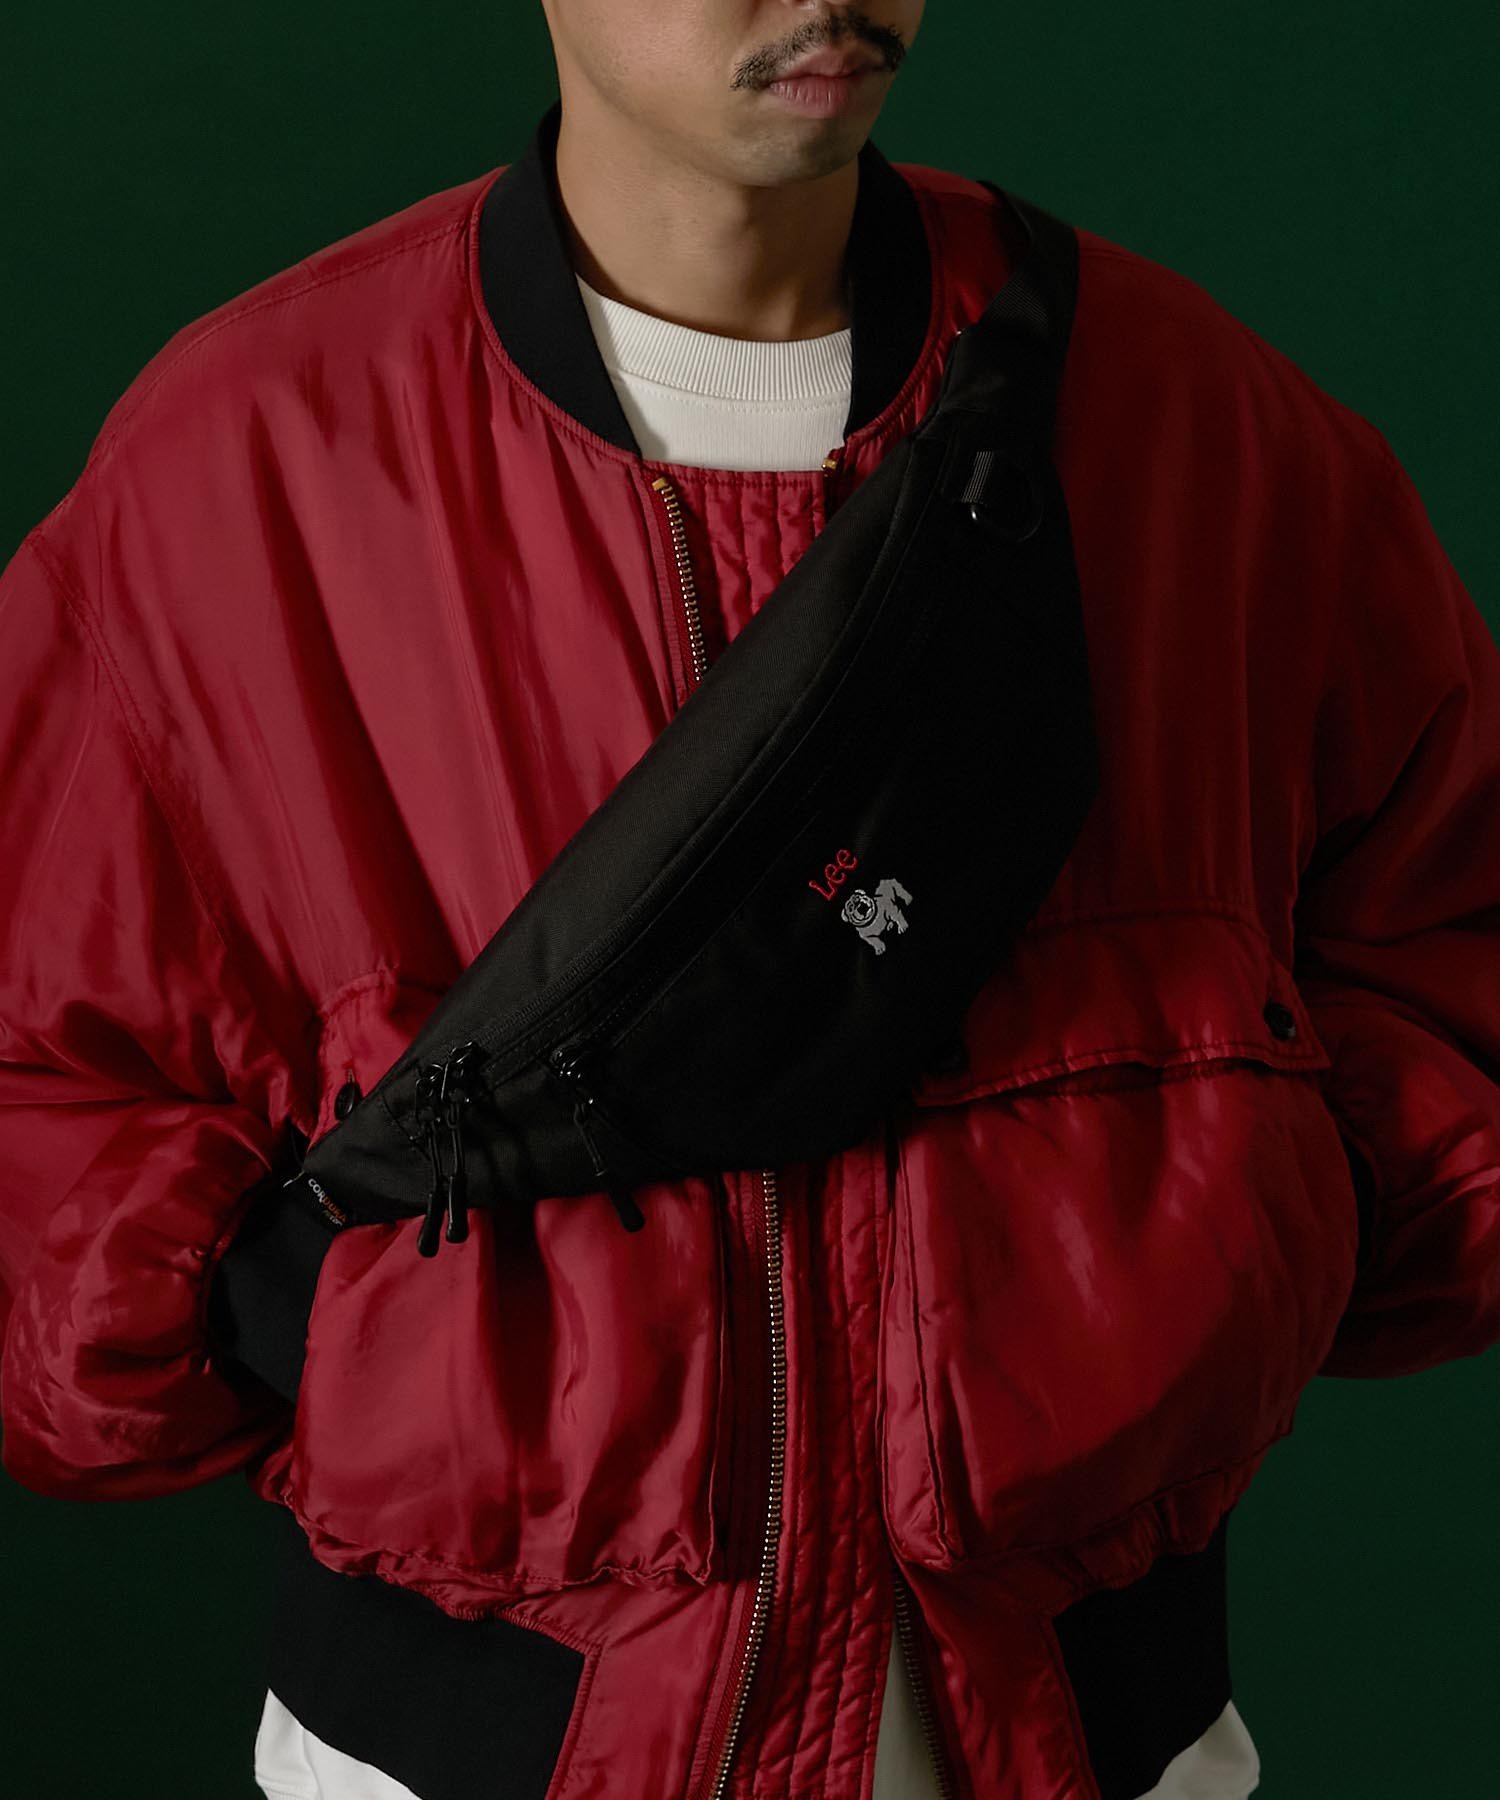 <img class='new_mark_img1' src='https://img.shop-pro.jp/img/new/icons15.gif' style='border:none;display:inline;margin:0px;padding:0px;width:auto;' />【Lee】CORDURA リサイクルポリエステル ウエストバッグ